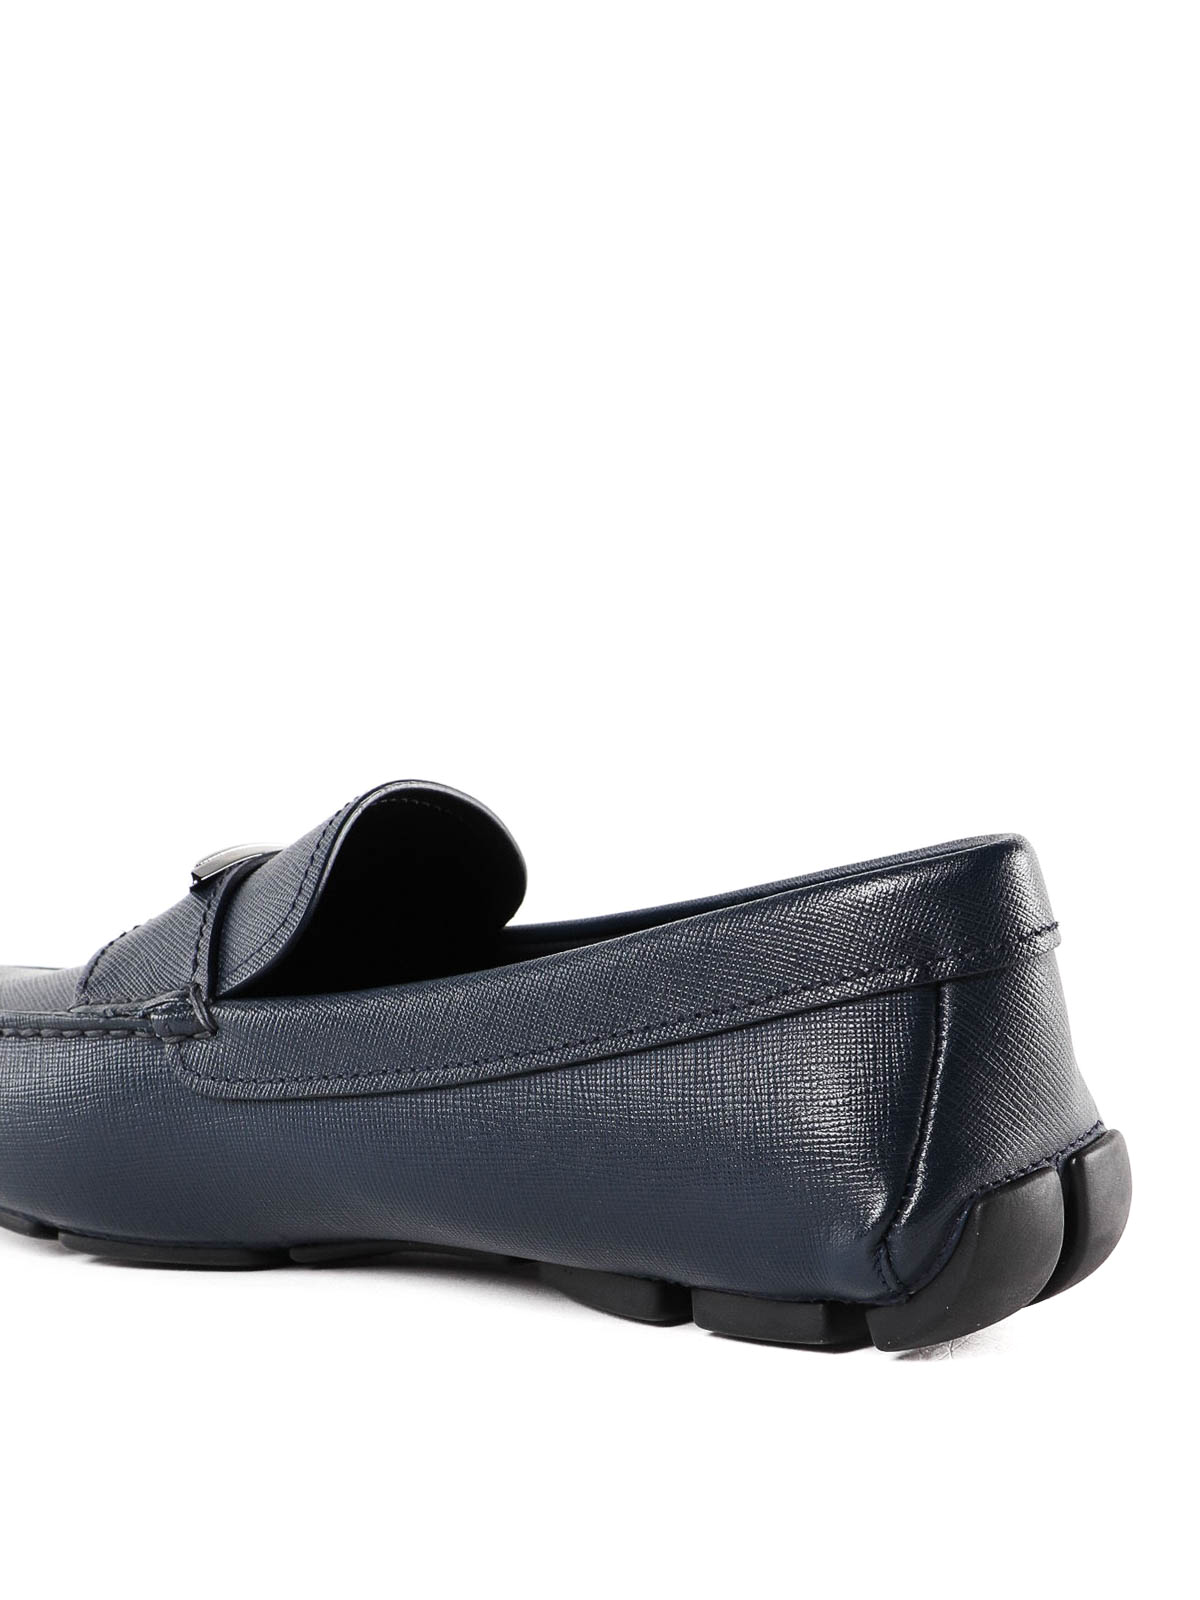 Loafers & Slippers Prada - Saffiano leather driver loafers - 2DD157053216